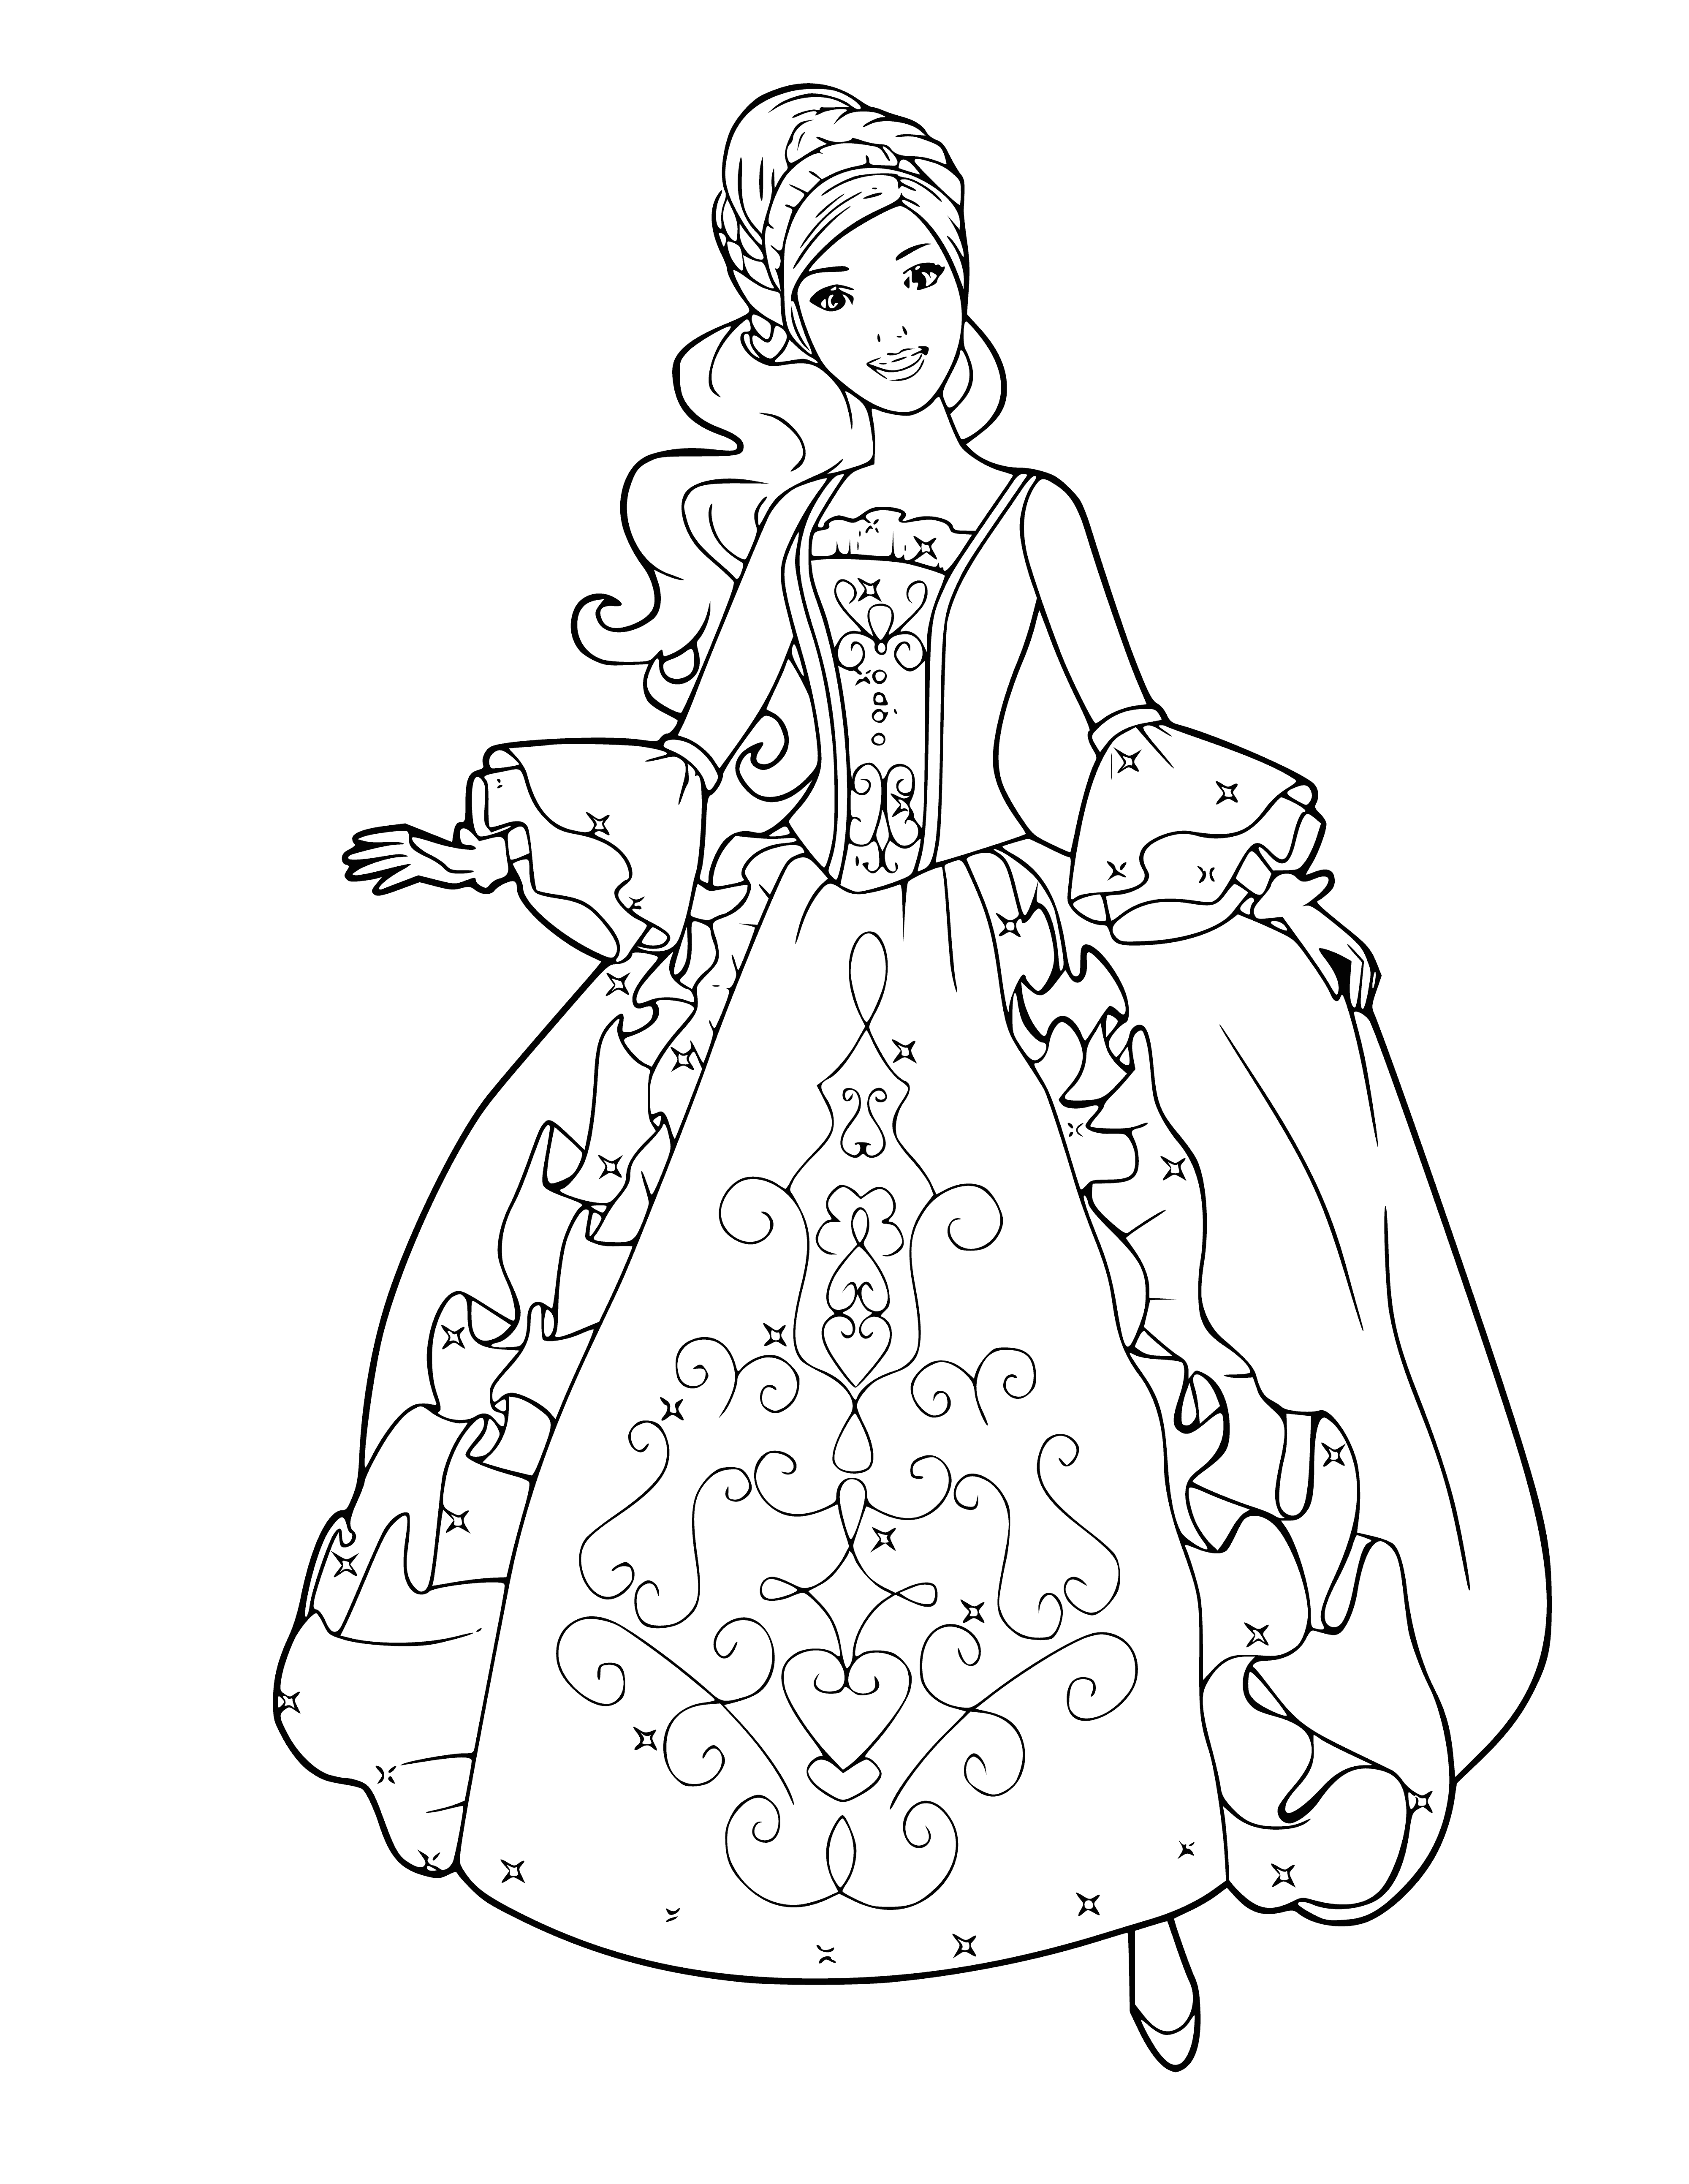 coloring page: Barbie wearing white dress, pink sash+bow, pink purse+bracelet, standing in front of a mirror. Reflection visible in mirror.